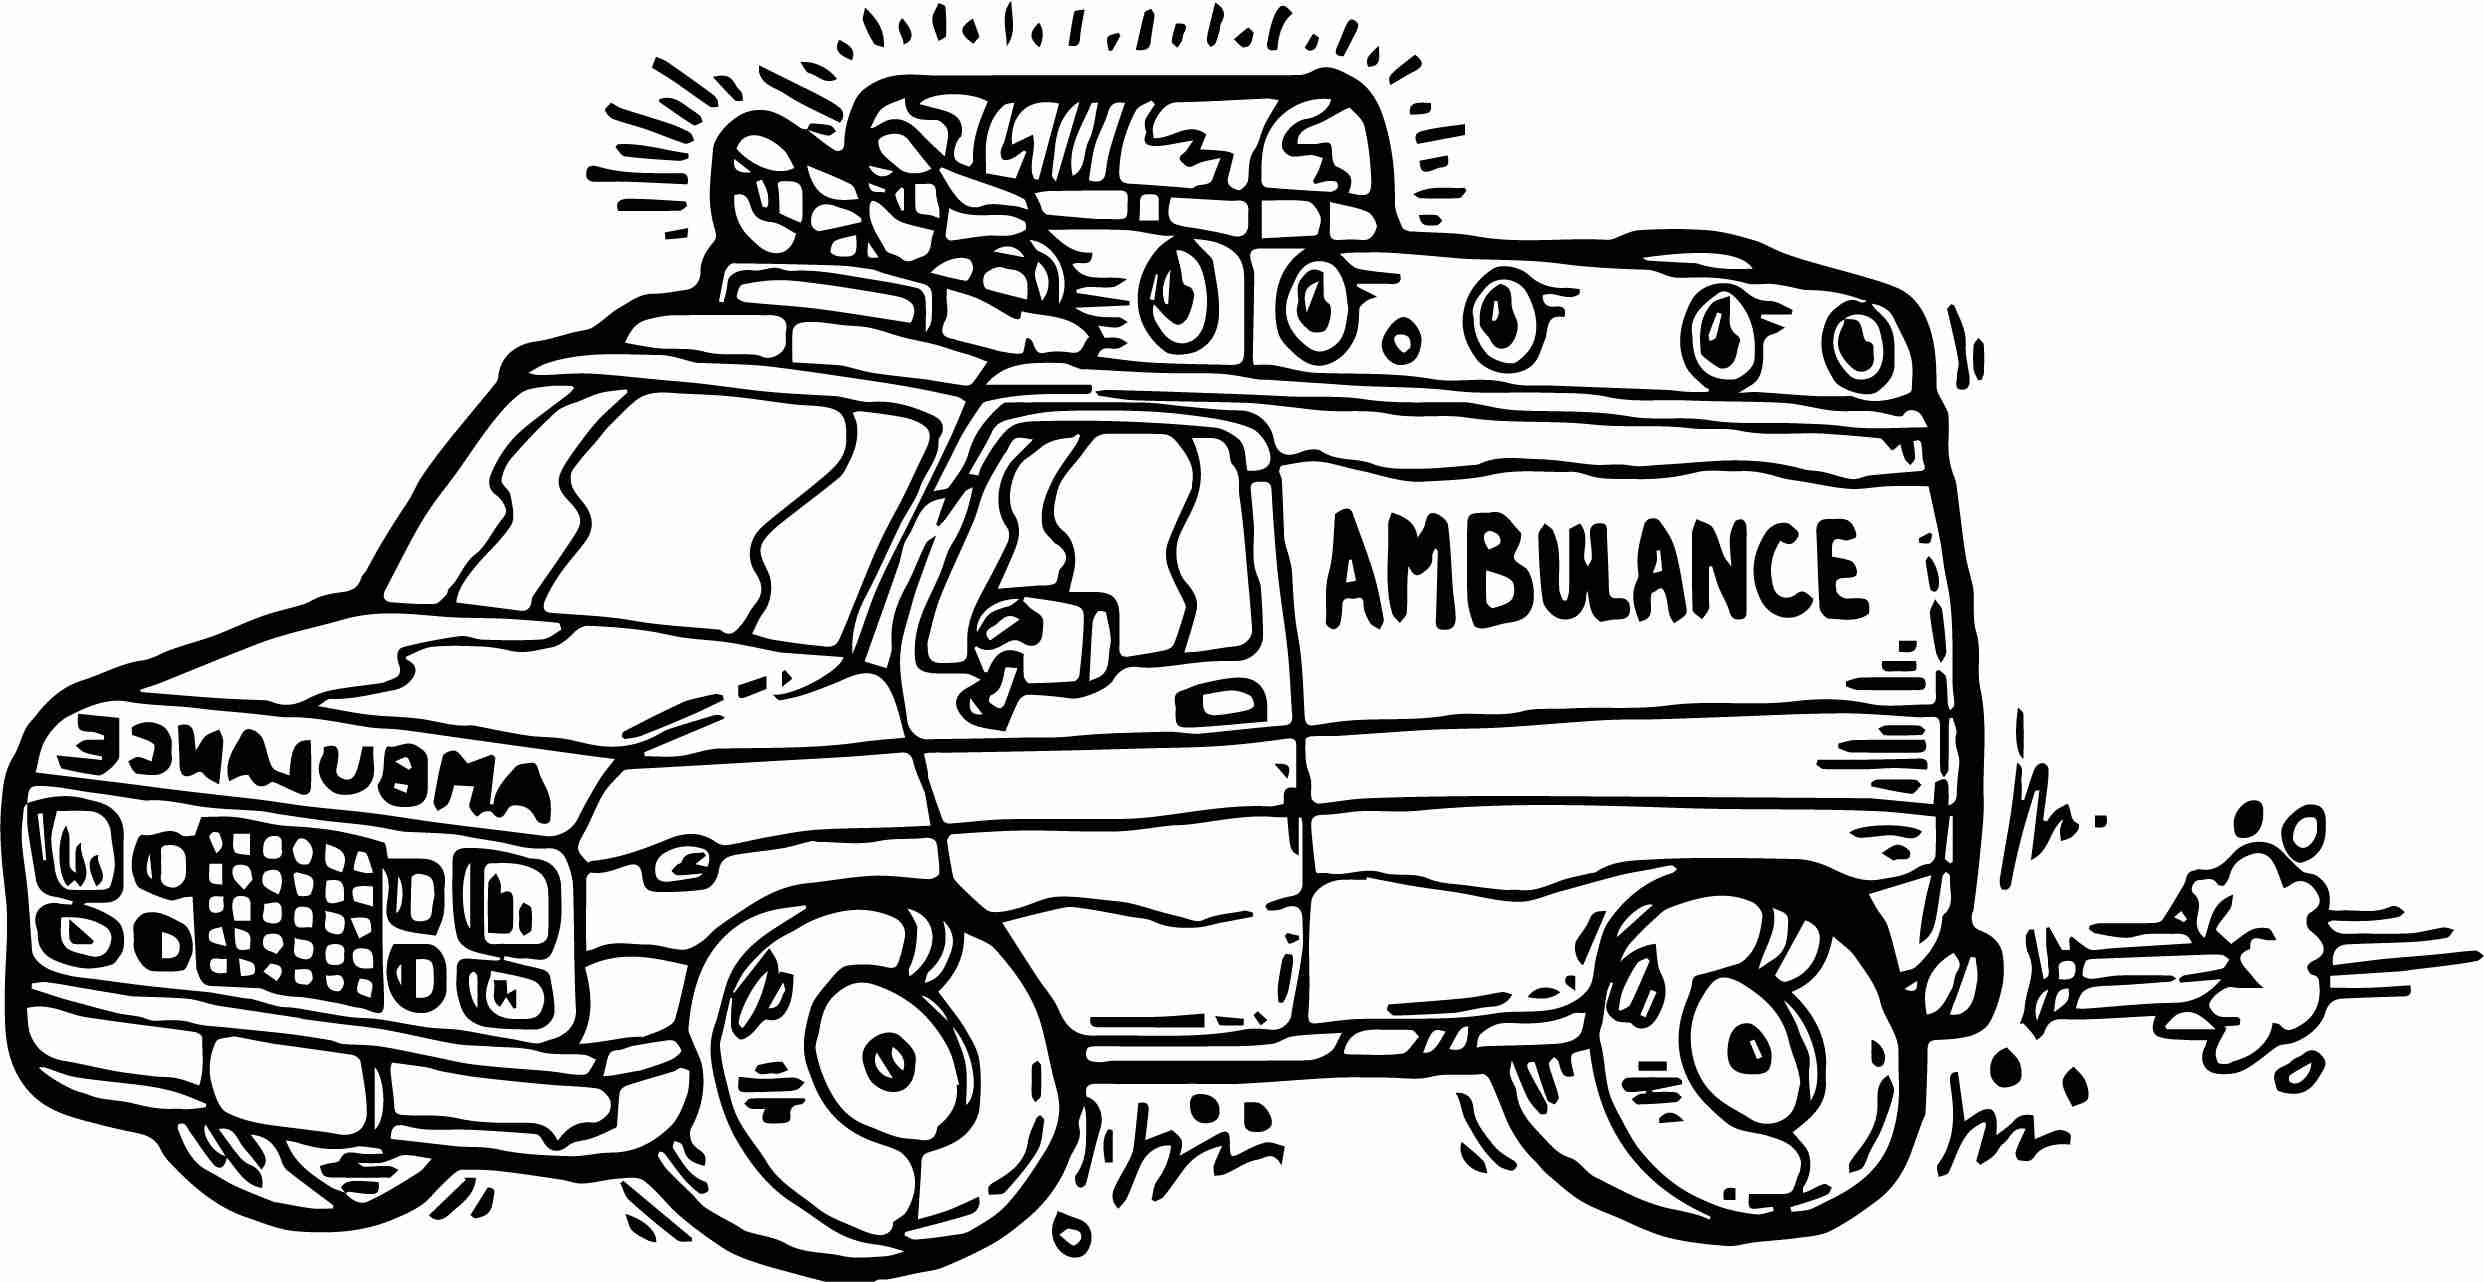 Ambulance Coloring Pages at GetColorings.com | Free ...